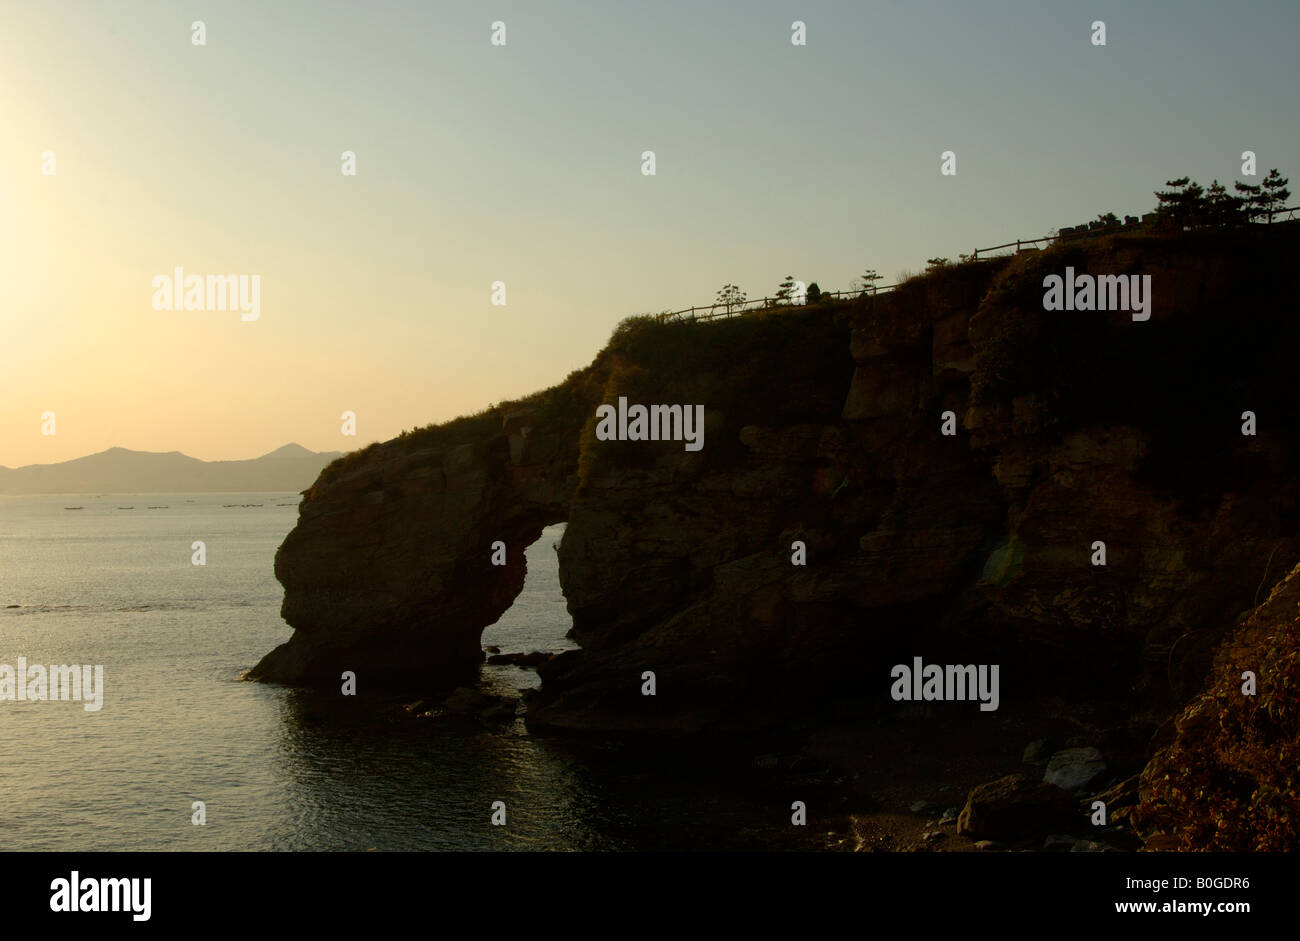 Eroded rocky coastline at Dalian Liaoning China depicts Dinosaur swallowing the Sea Stock Photo